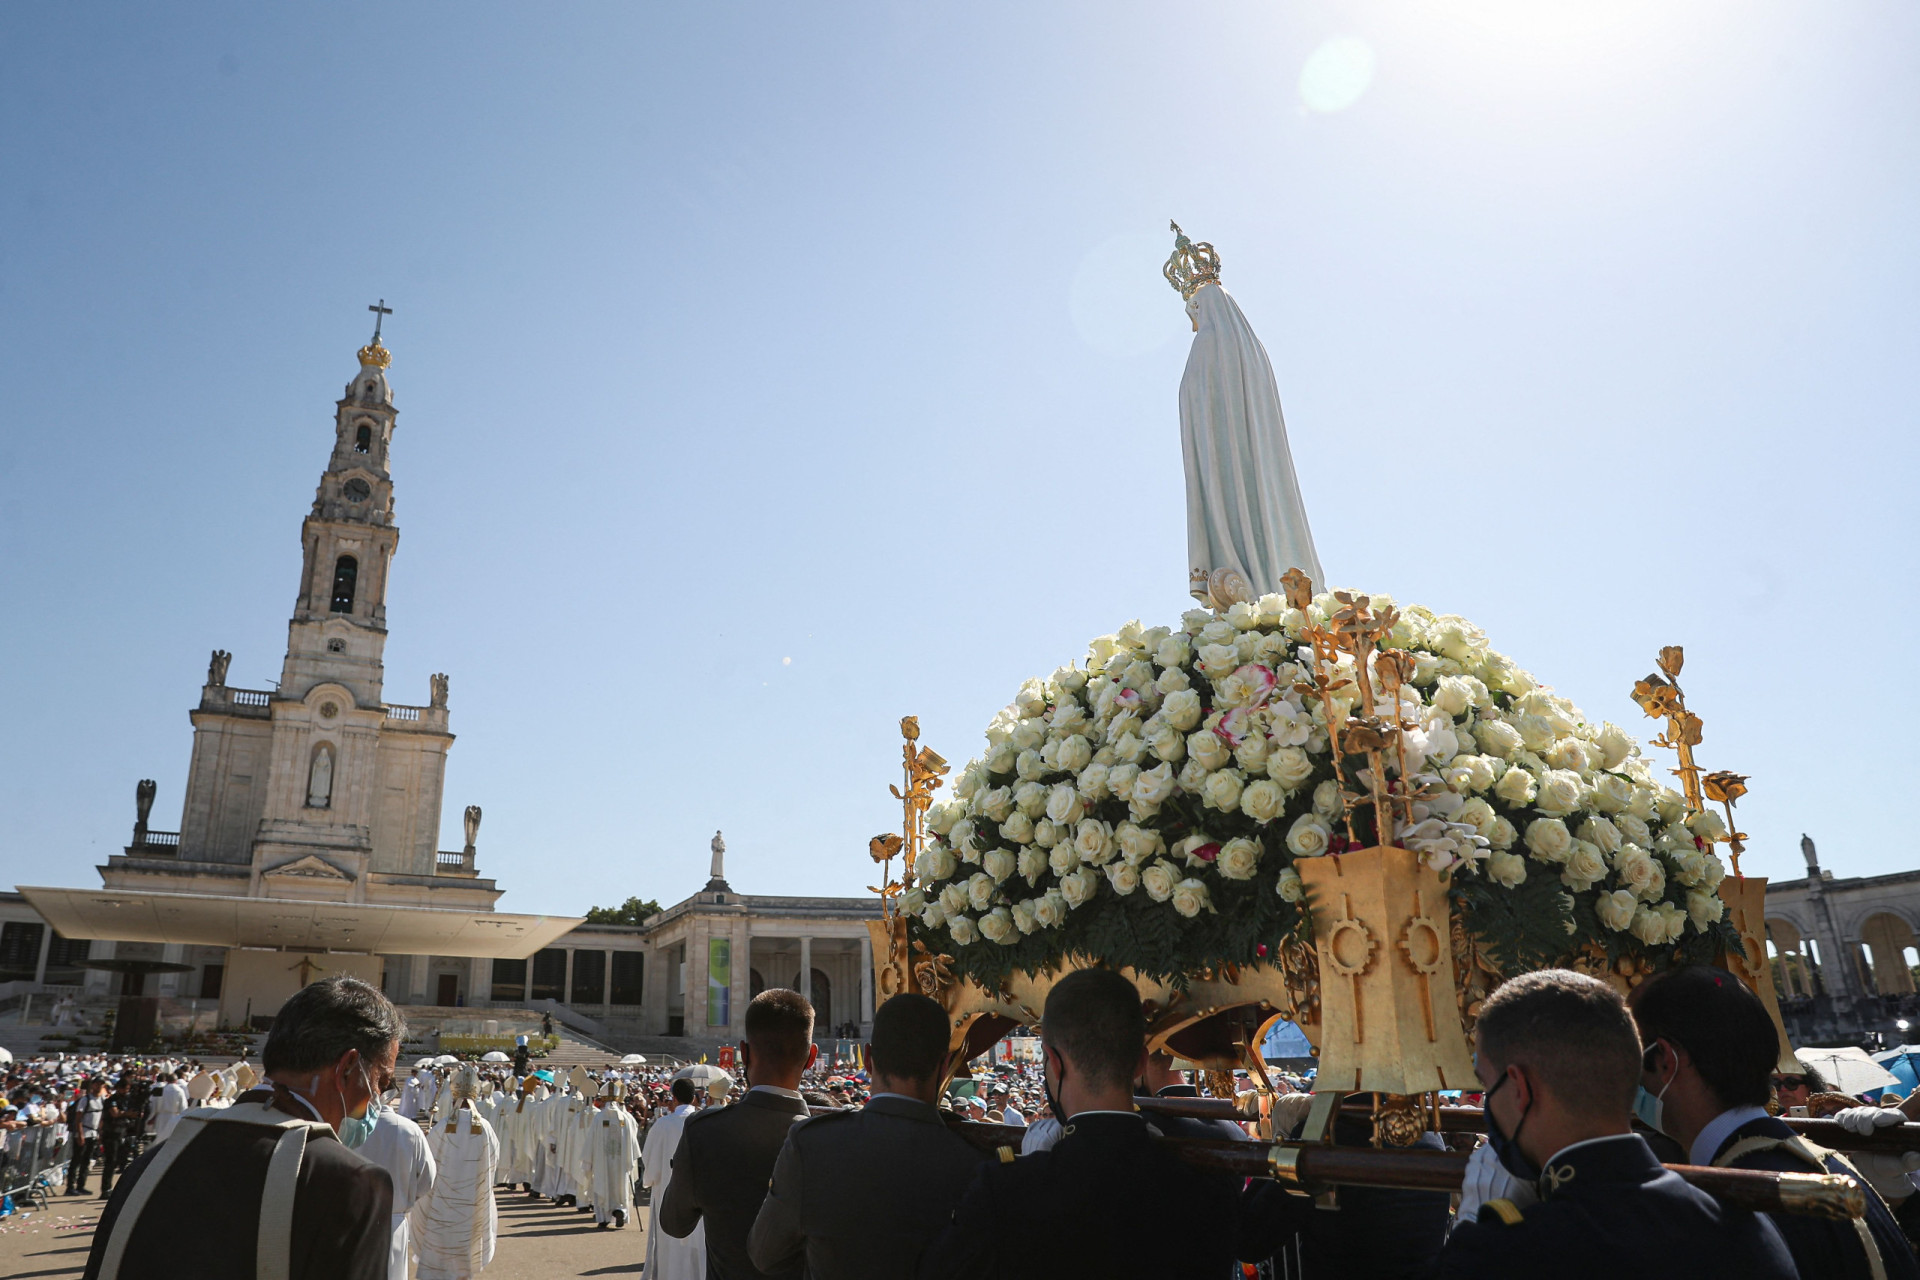 <p>In 1917, three young shepherds claimed to have seen an apparition of the Virgin Mary in Cova da Iria. Soon after, pilgrimages to the location began on the anniversaries of the apparitions. Fátima is located nearly 90 miles (130 km) from Lisbon.</p><p>You may also like:<a href="https://www.starsinsider.com/n/198574?utm_source=msn.com&utm_medium=display&utm_campaign=referral_description&utm_content=524487en-us"> What's new on Netflix UK in April</a></p>